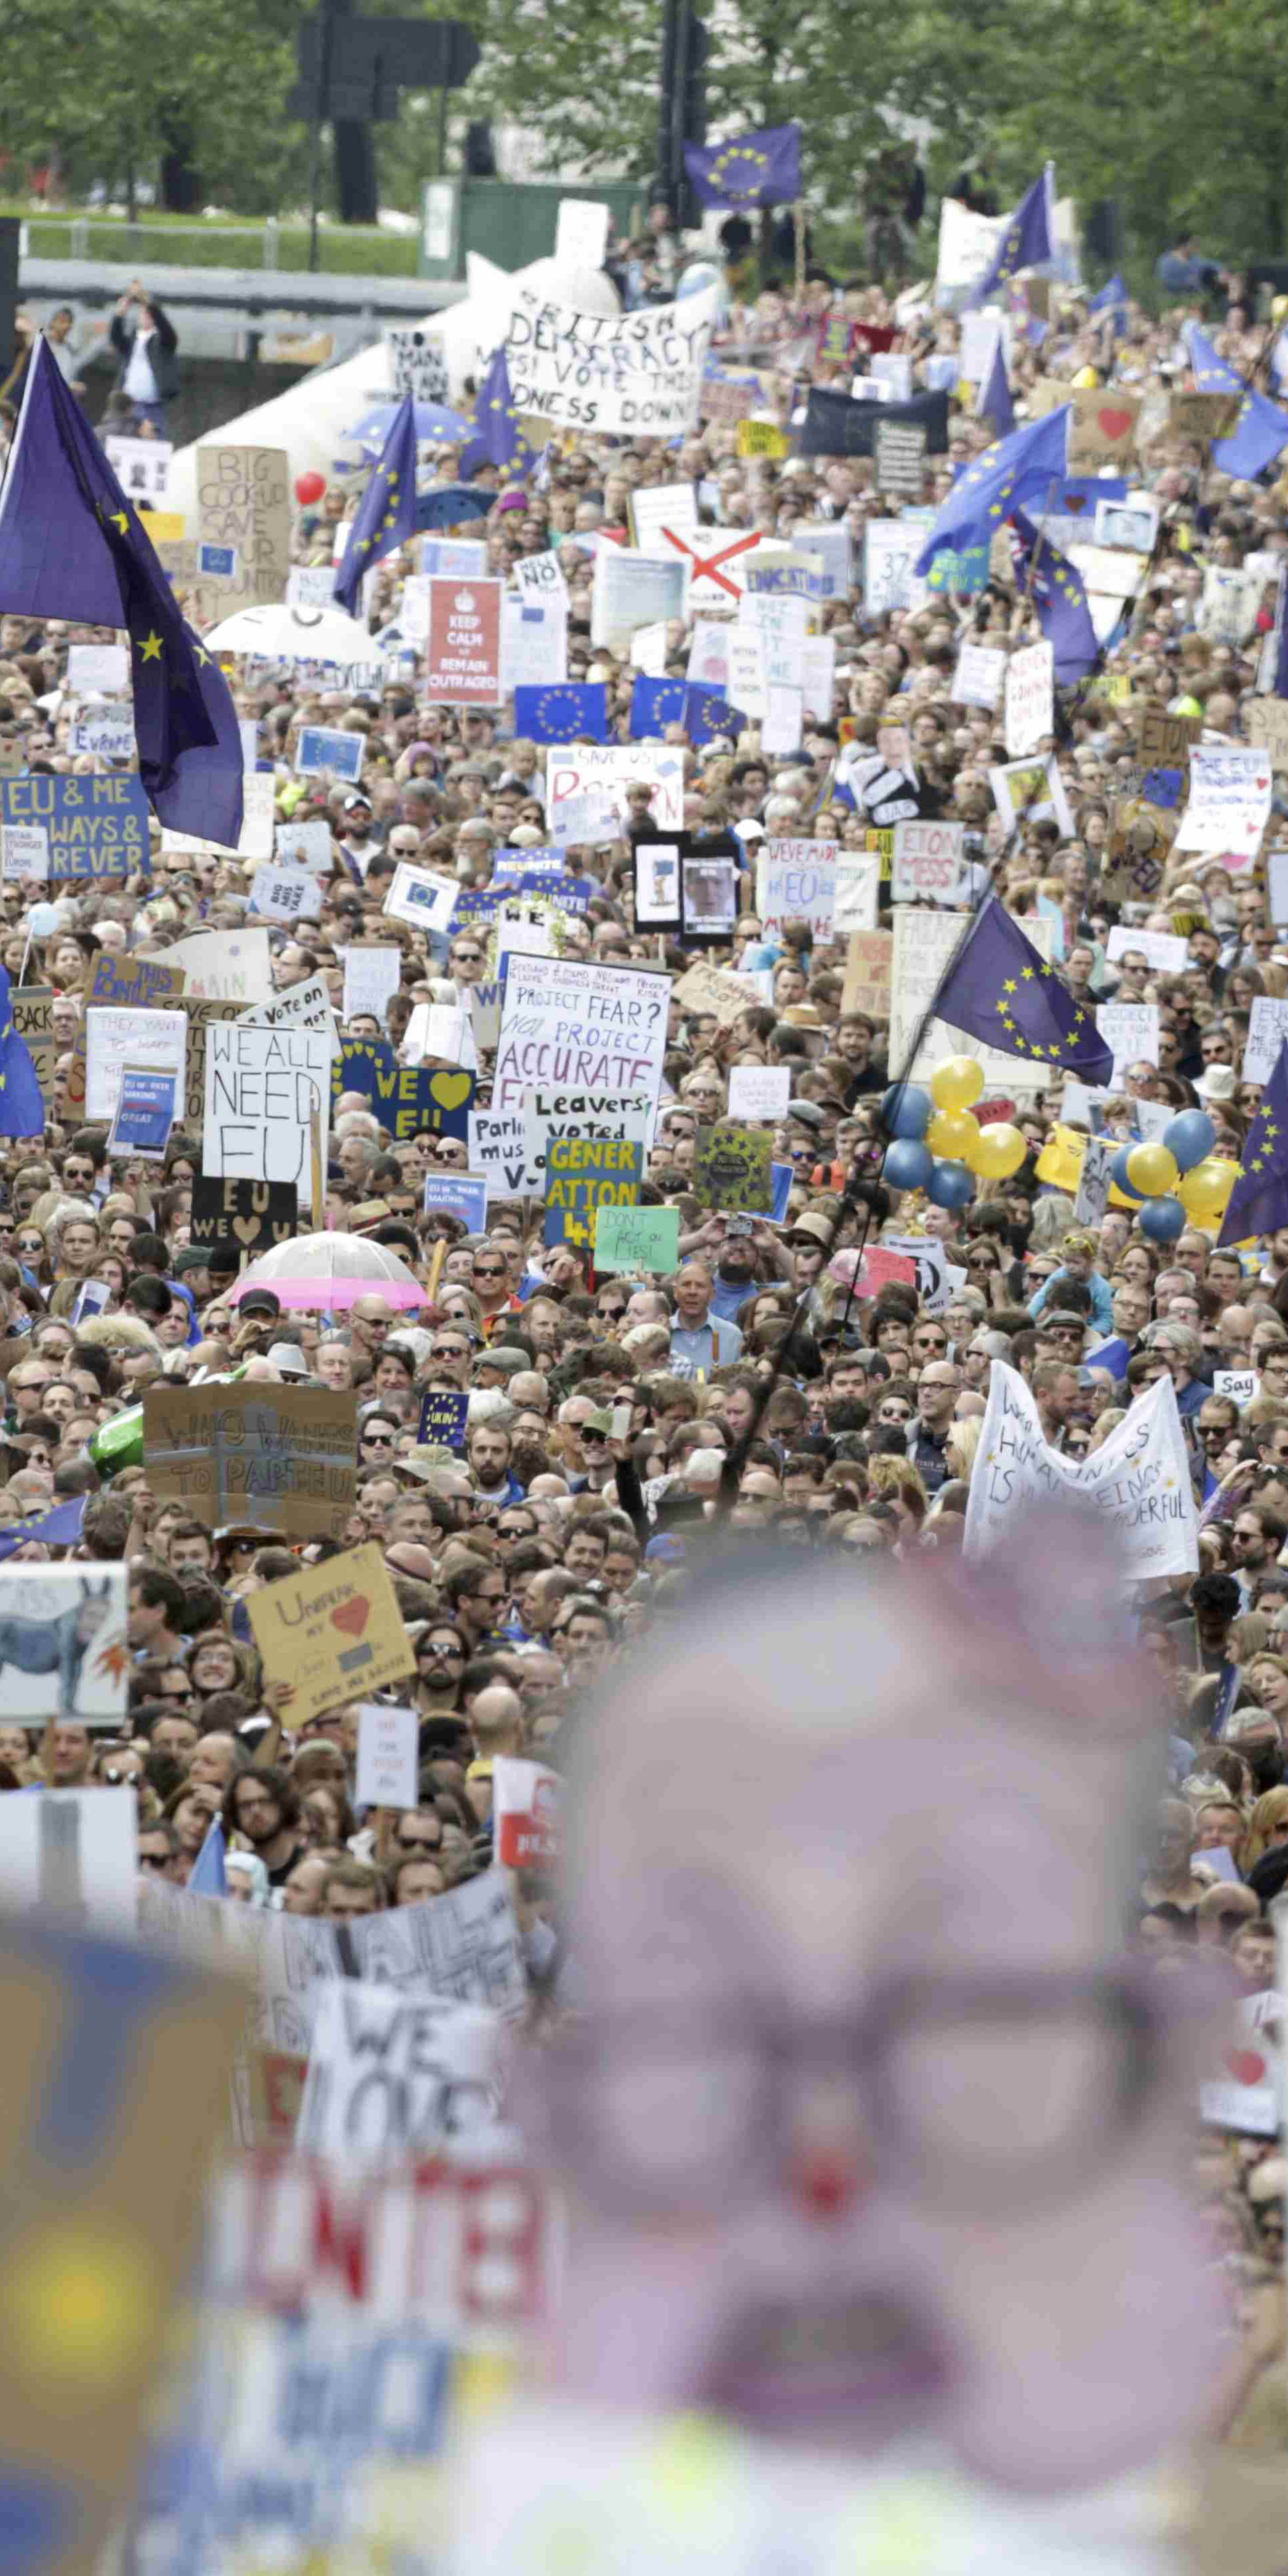 People hold banners during a demonstration against Britain's decision to leave the European Union, in central London